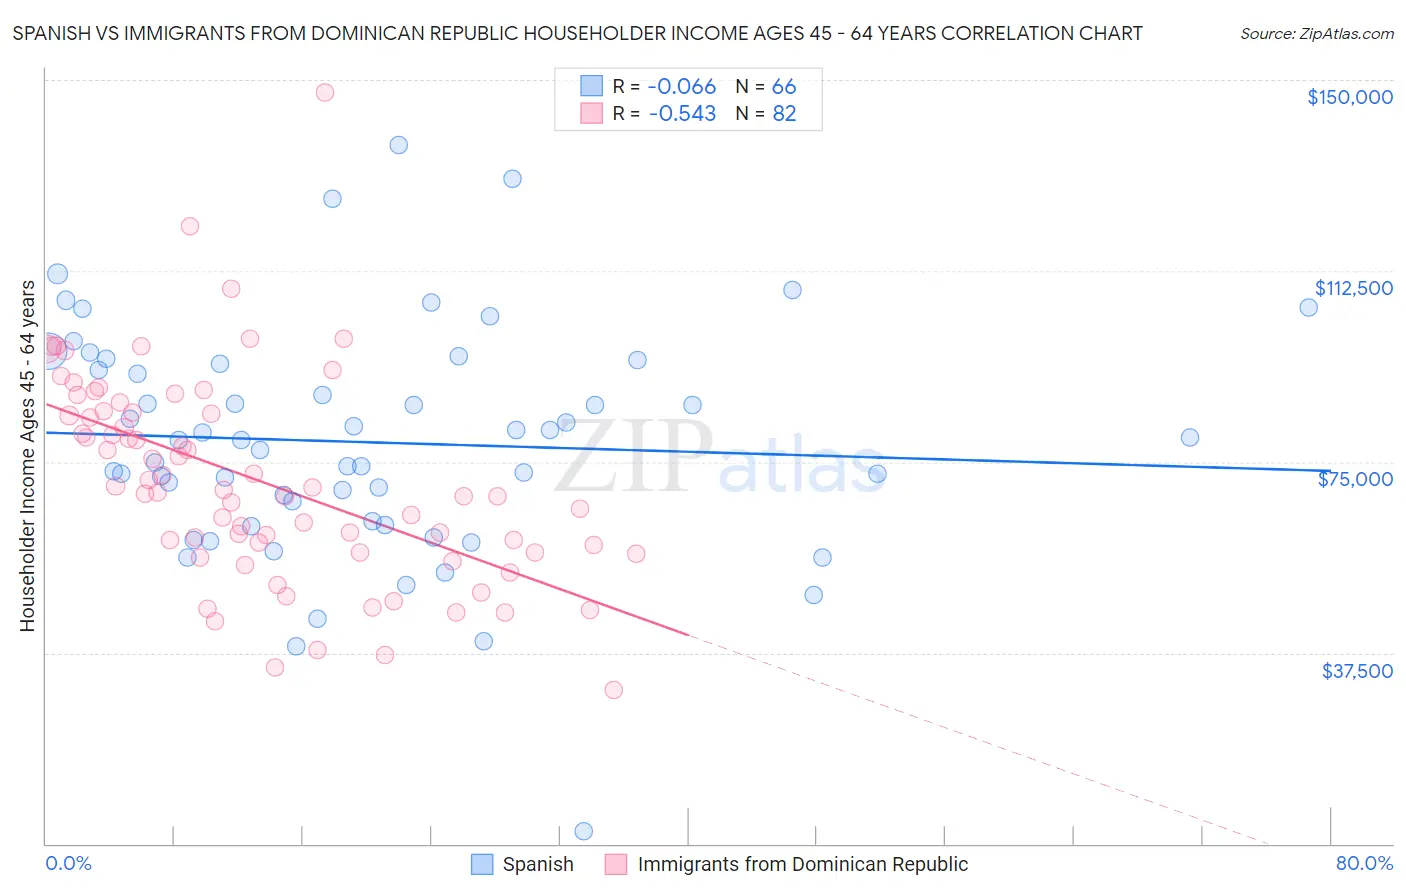 Spanish vs Immigrants from Dominican Republic Householder Income Ages 45 - 64 years